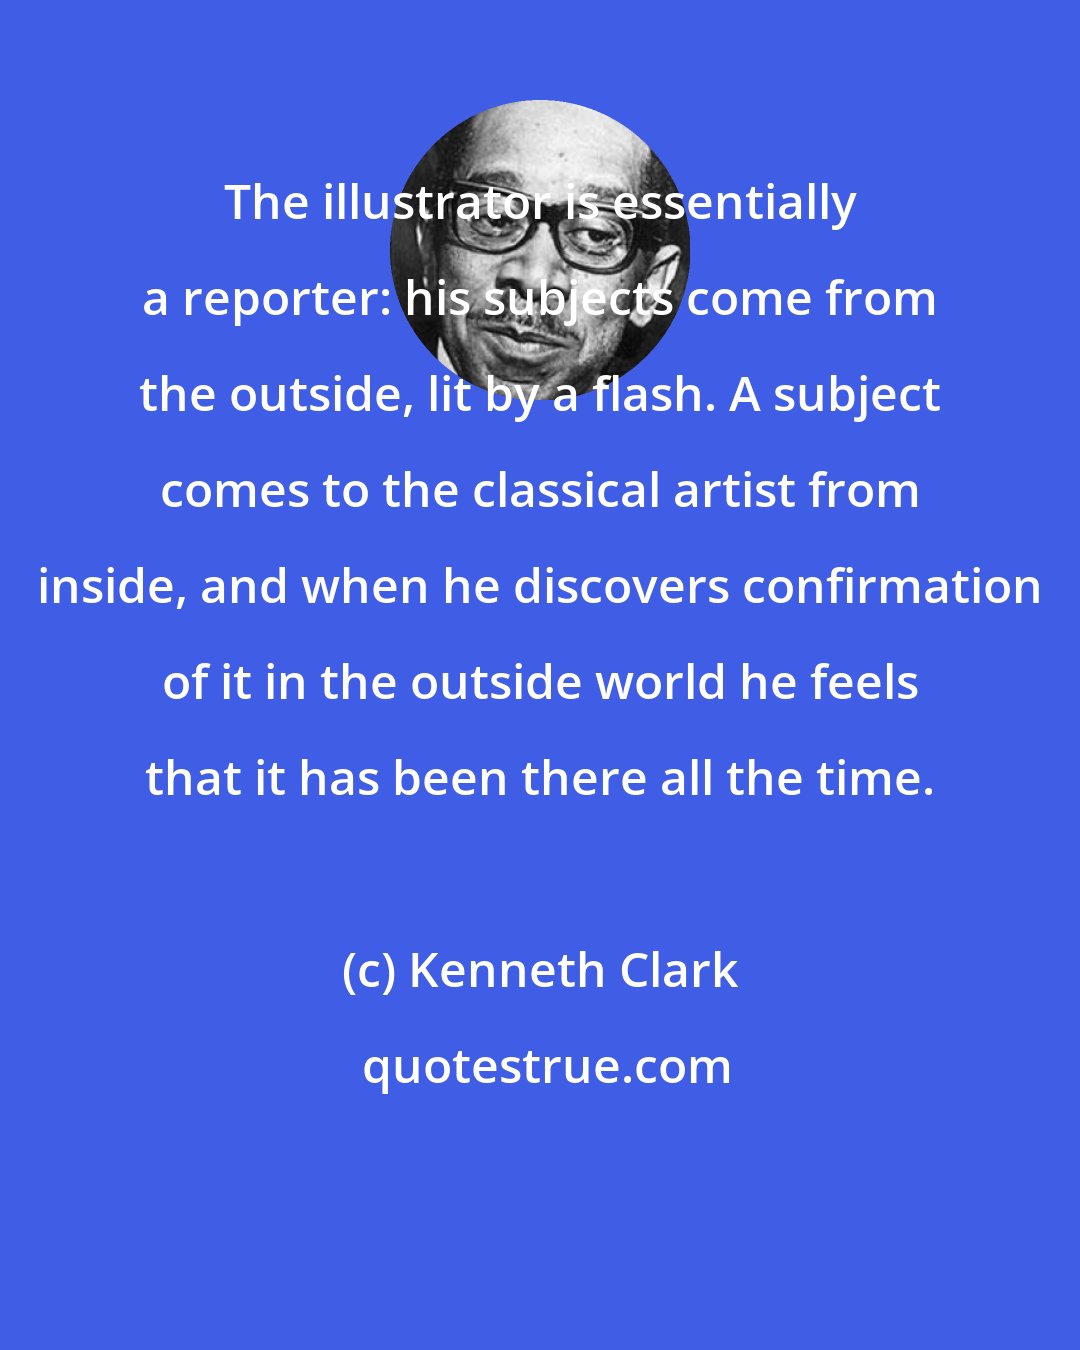 Kenneth Clark: The illustrator is essentially a reporter: his subjects come from the outside, lit by a flash. A subject comes to the classical artist from inside, and when he discovers confirmation of it in the outside world he feels that it has been there all the time.